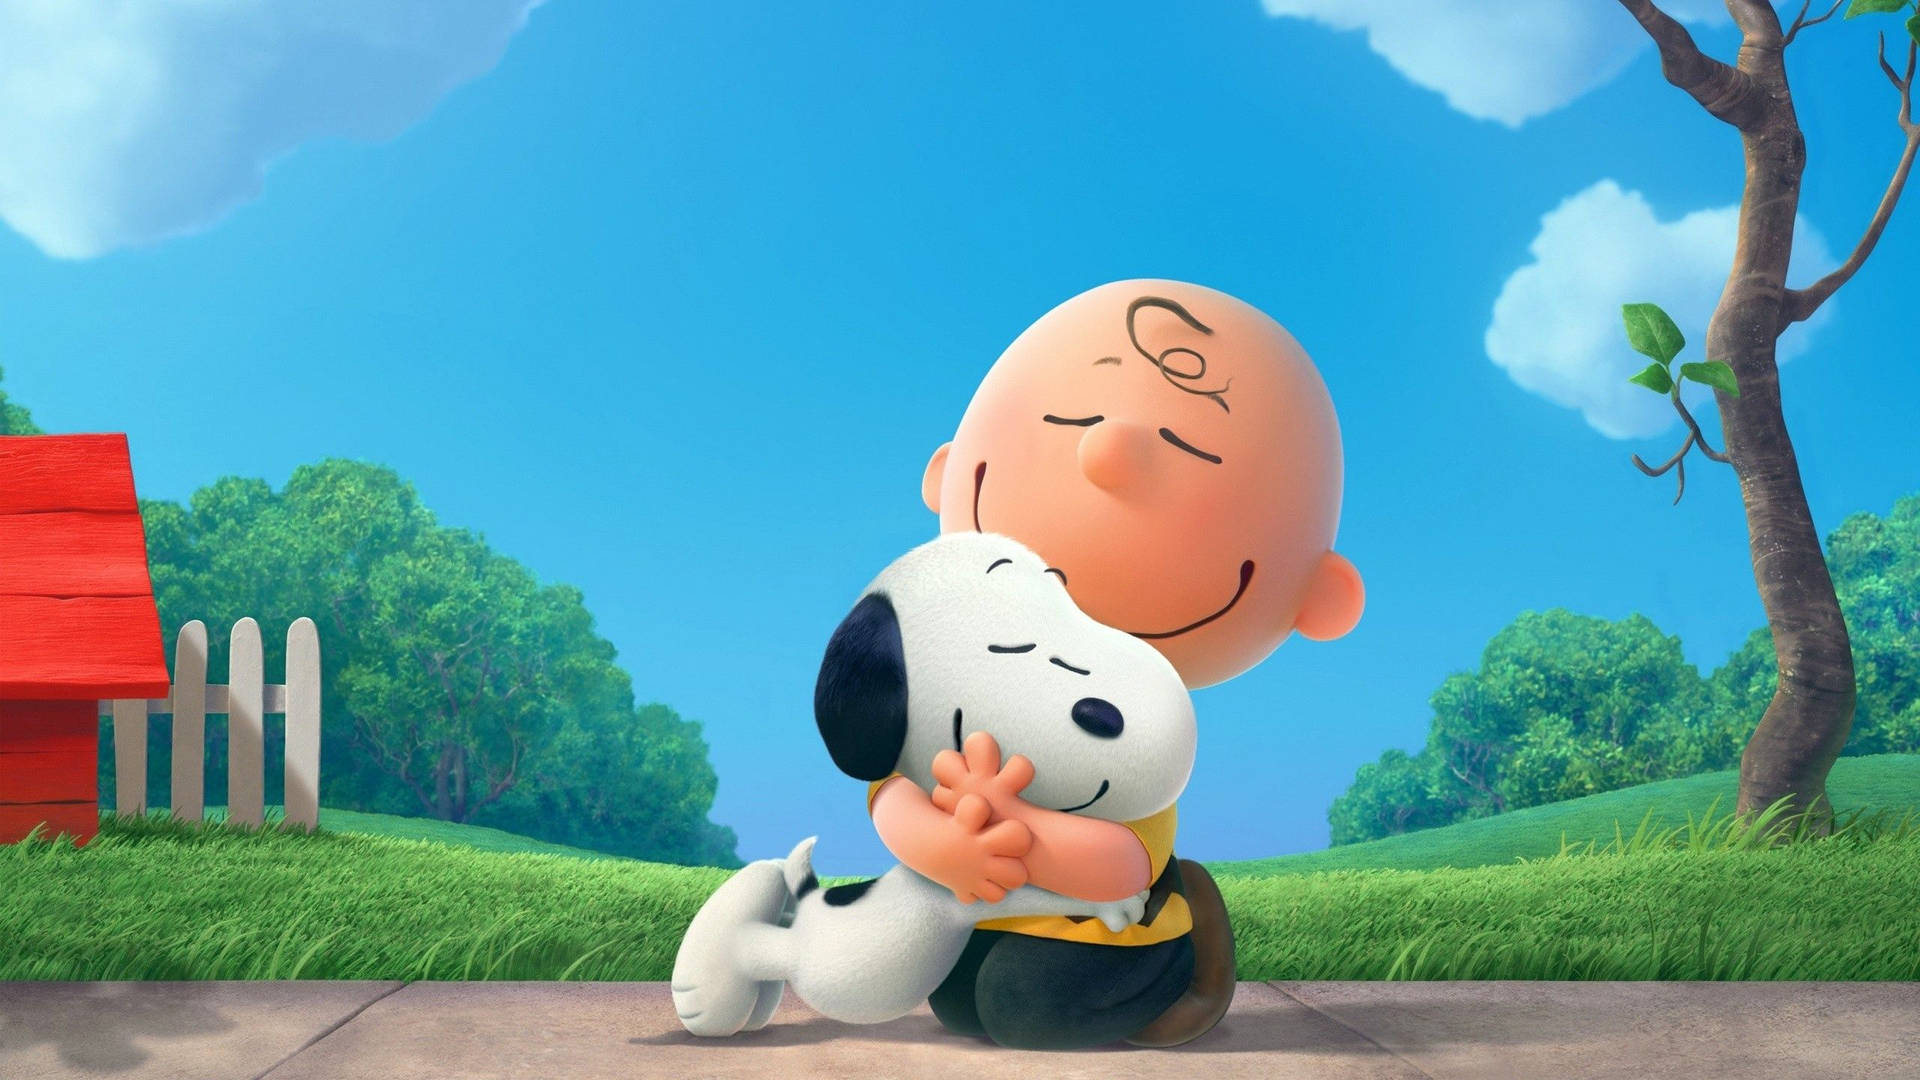 Charlie Brown 2560X1440 Wallpaper and Background Image